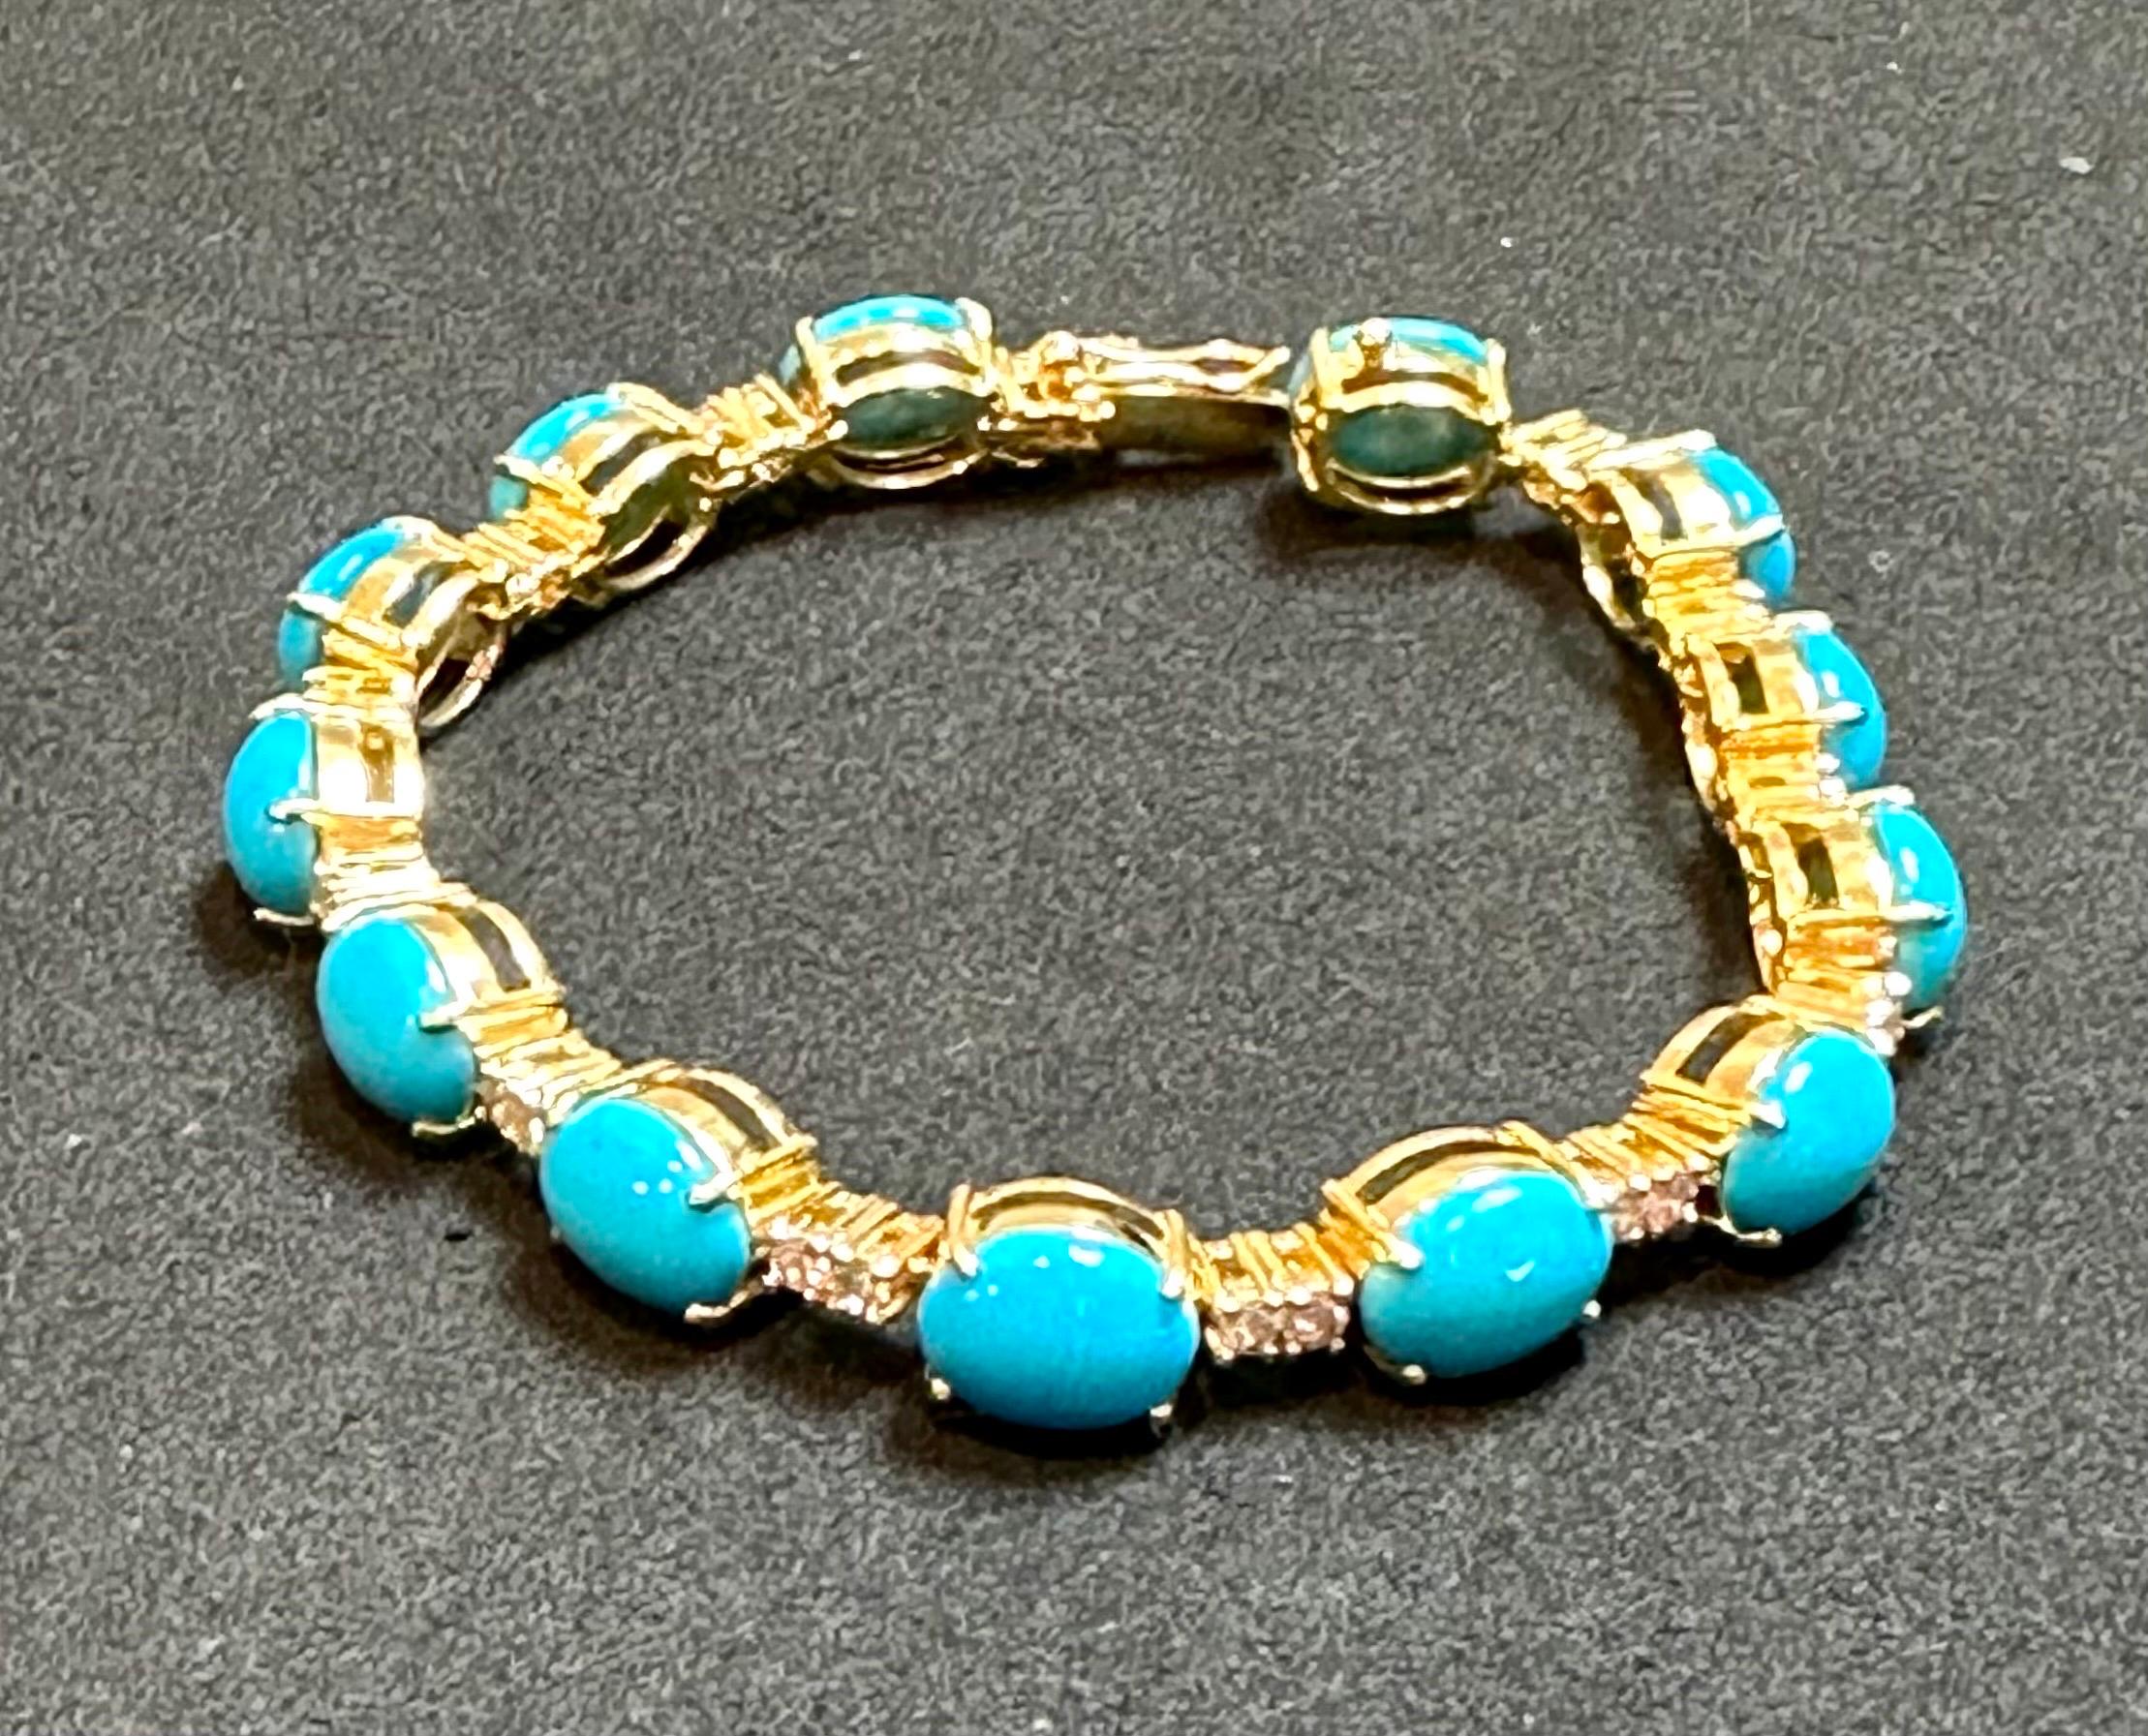 13Ct Natural Sleeping Beauty Turquoise & Diamond Tennis Bracelet 14k Yellow Gold For Sale 2